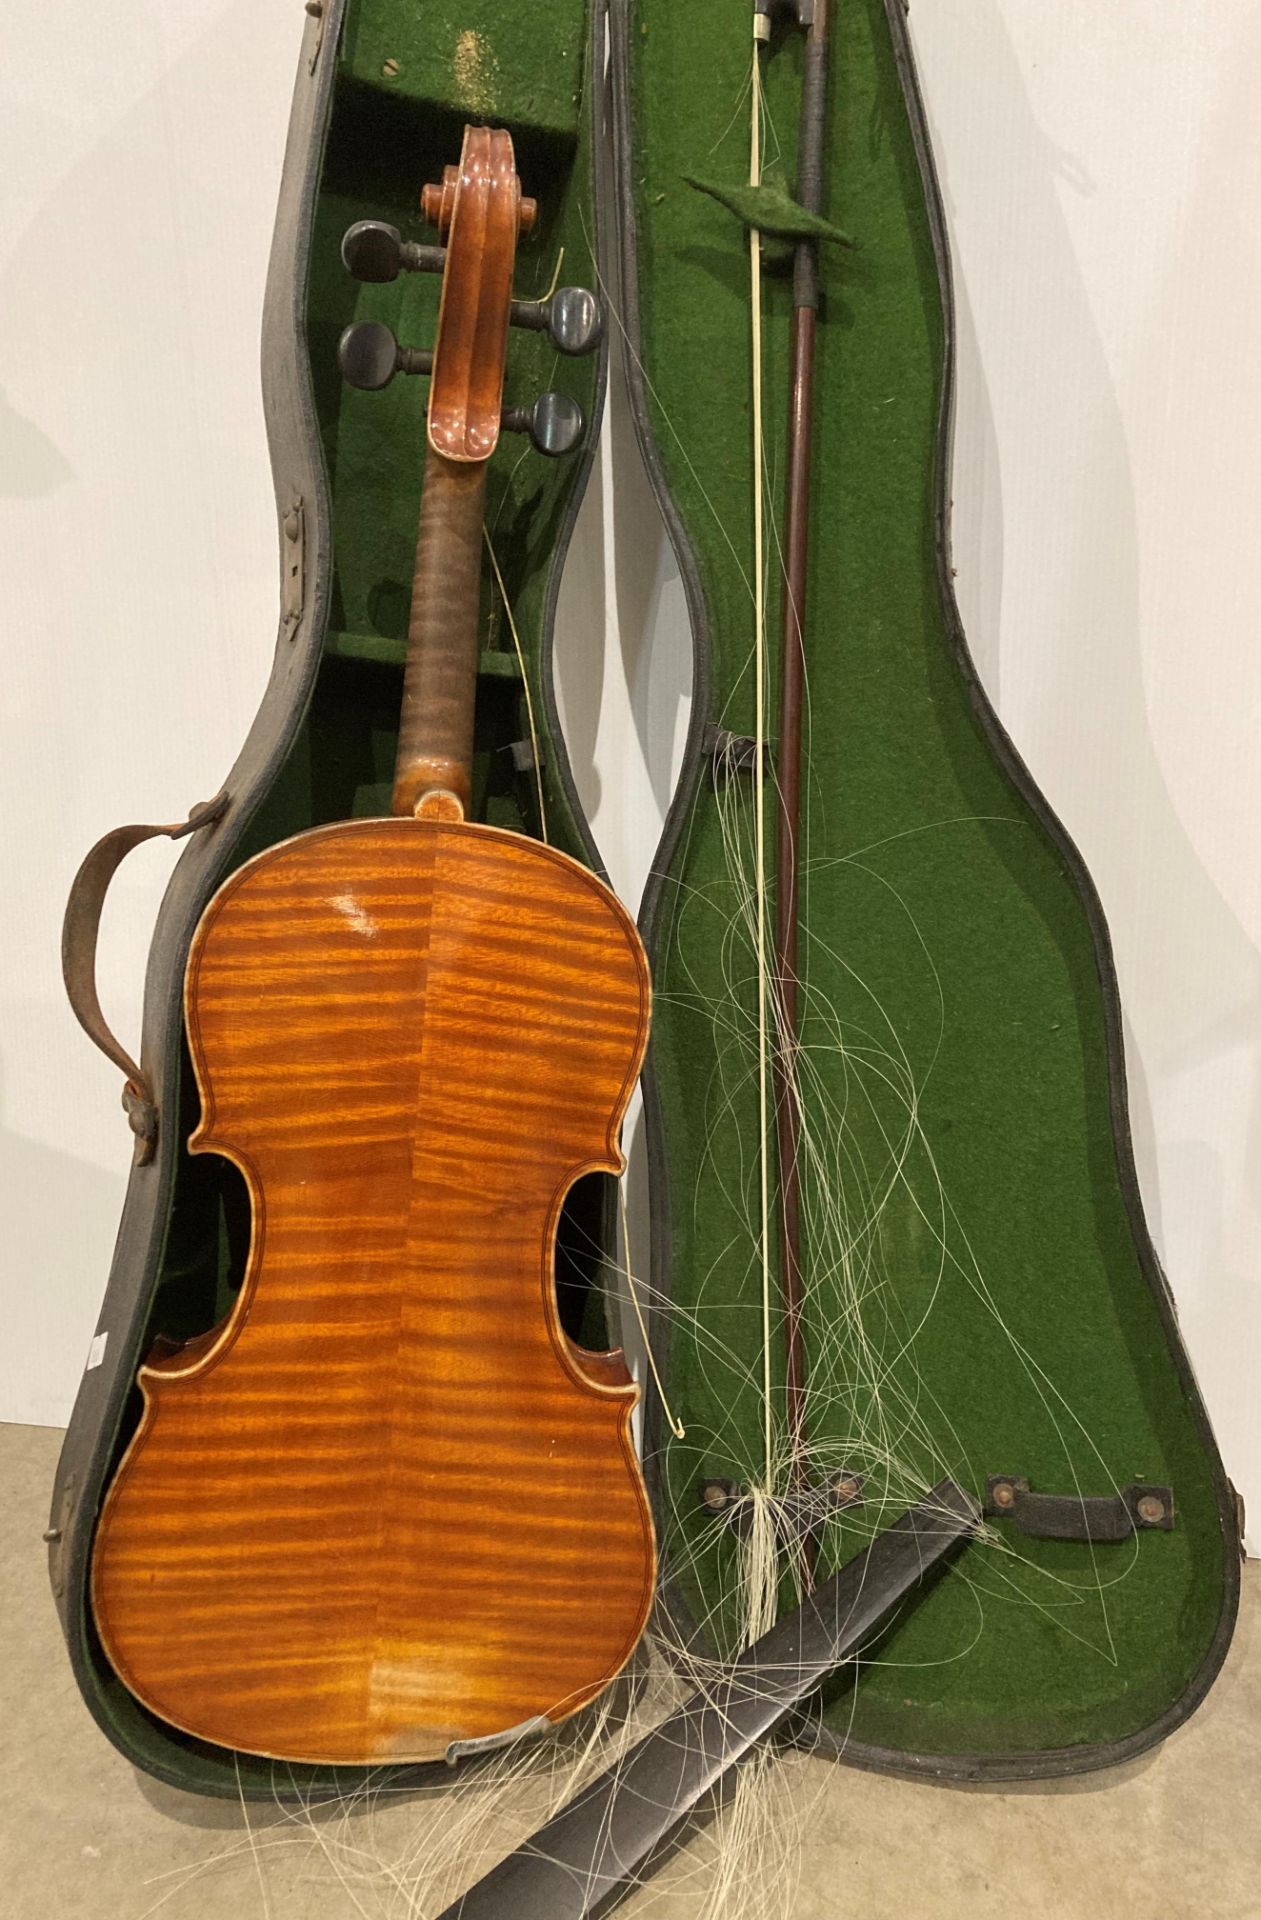 Carlo Storioni Cremonensis Faciebat 1893 violin with bow in a black case lined with green fabric - Image 2 of 14